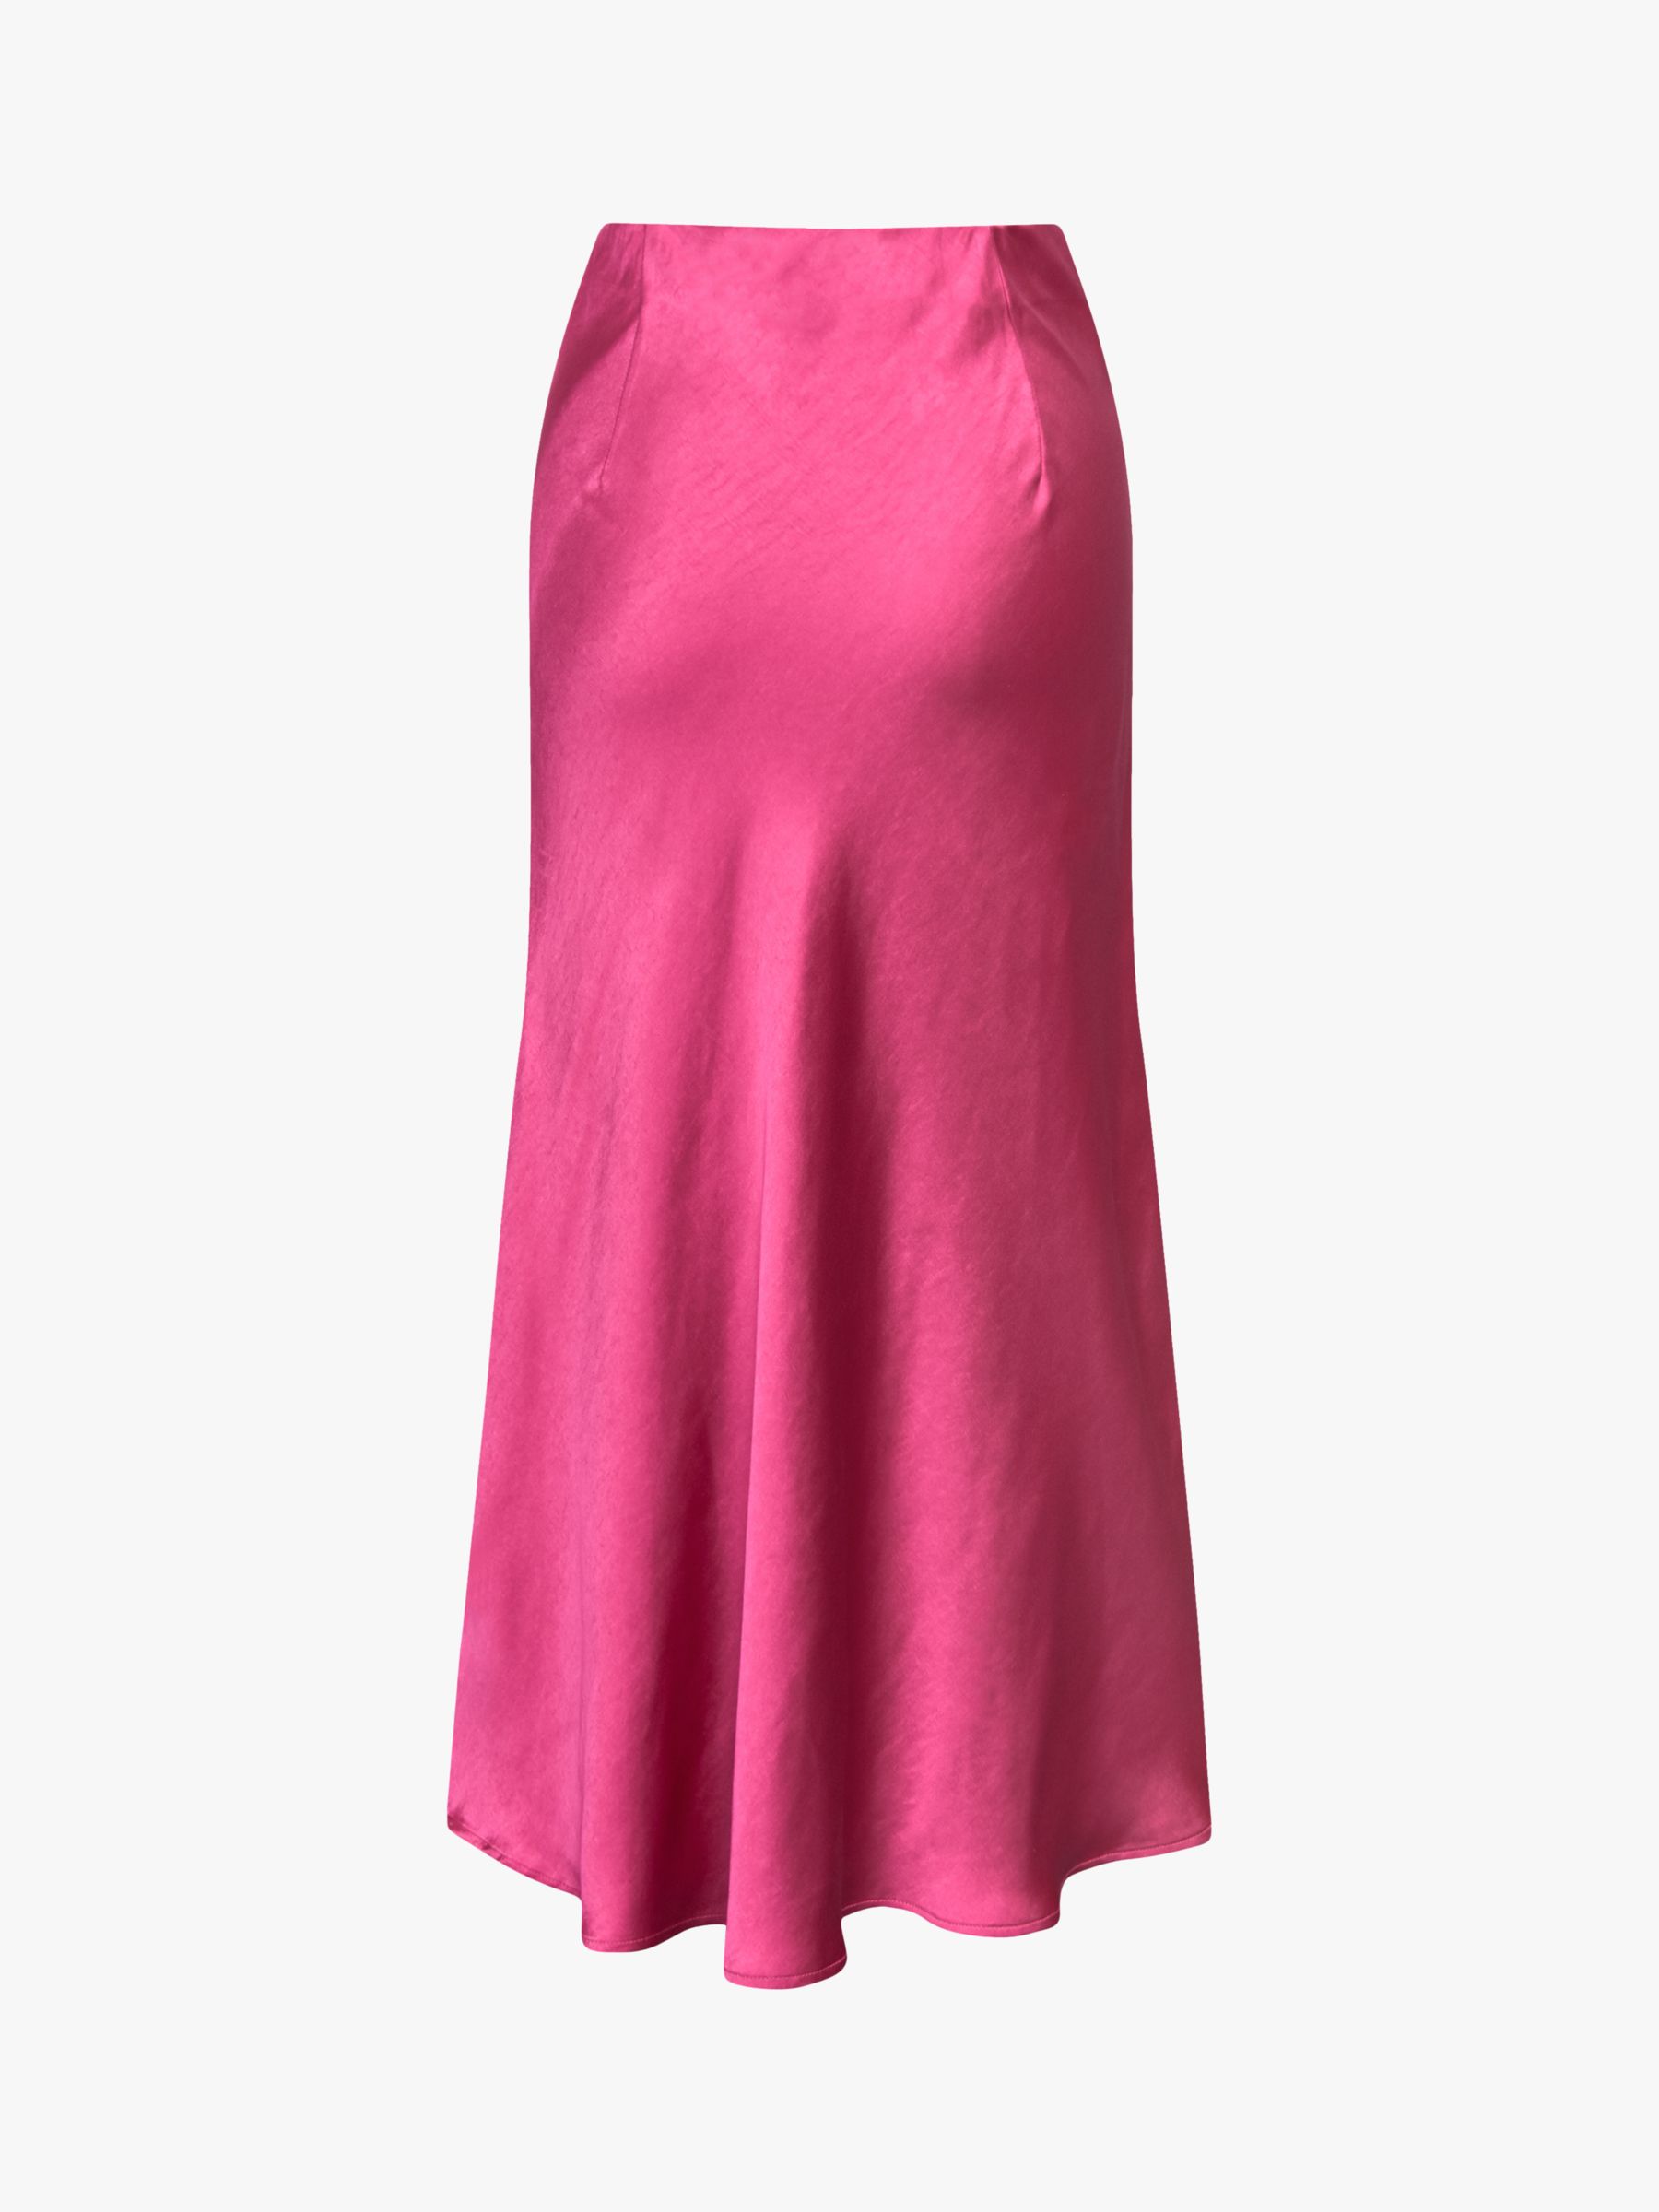 Buy A-VIEW Carry Sateen Skirt, Pink Online at johnlewis.com